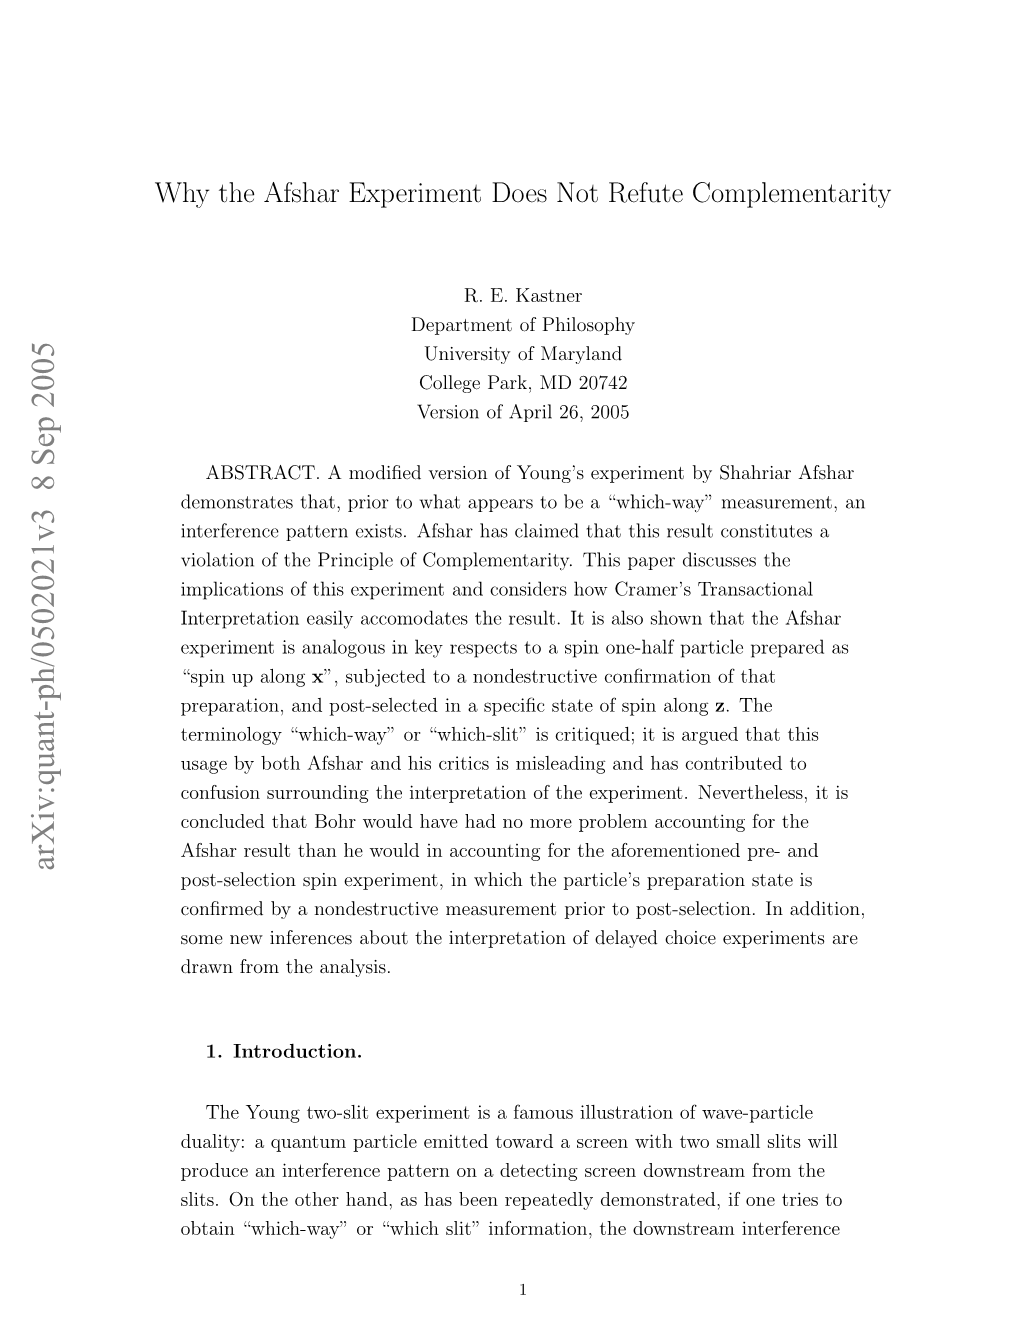 Why the Afshar Experiment Does Not Refute Complementarity